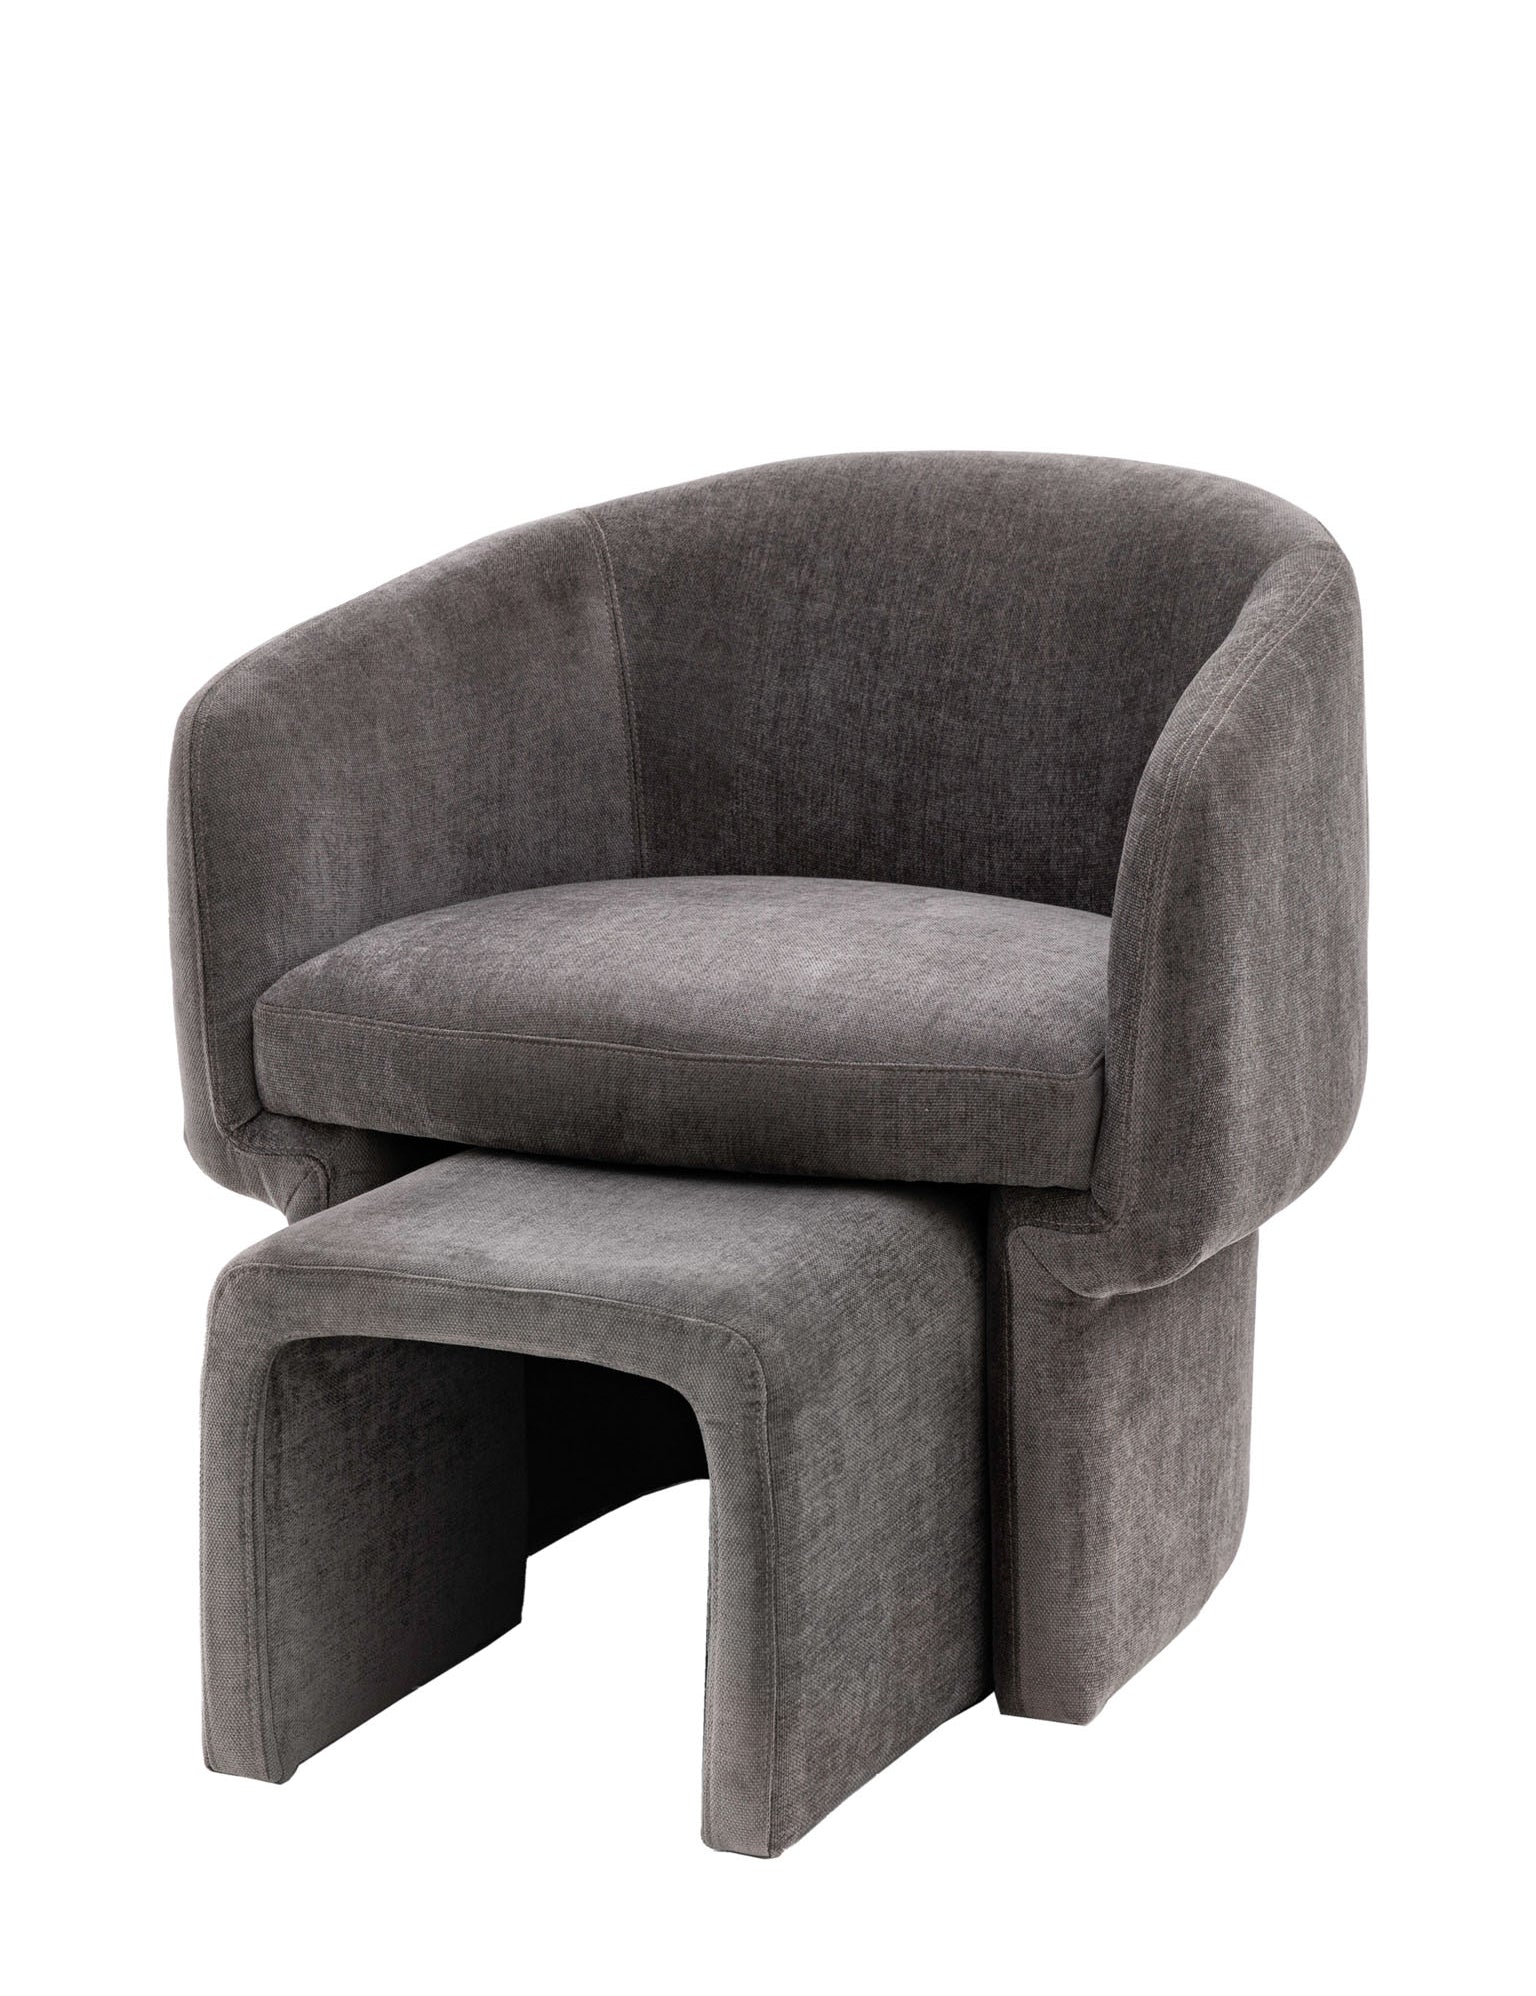 Aslan Armchair in anthracite, retro design, smooth curved back, vintage influence, 